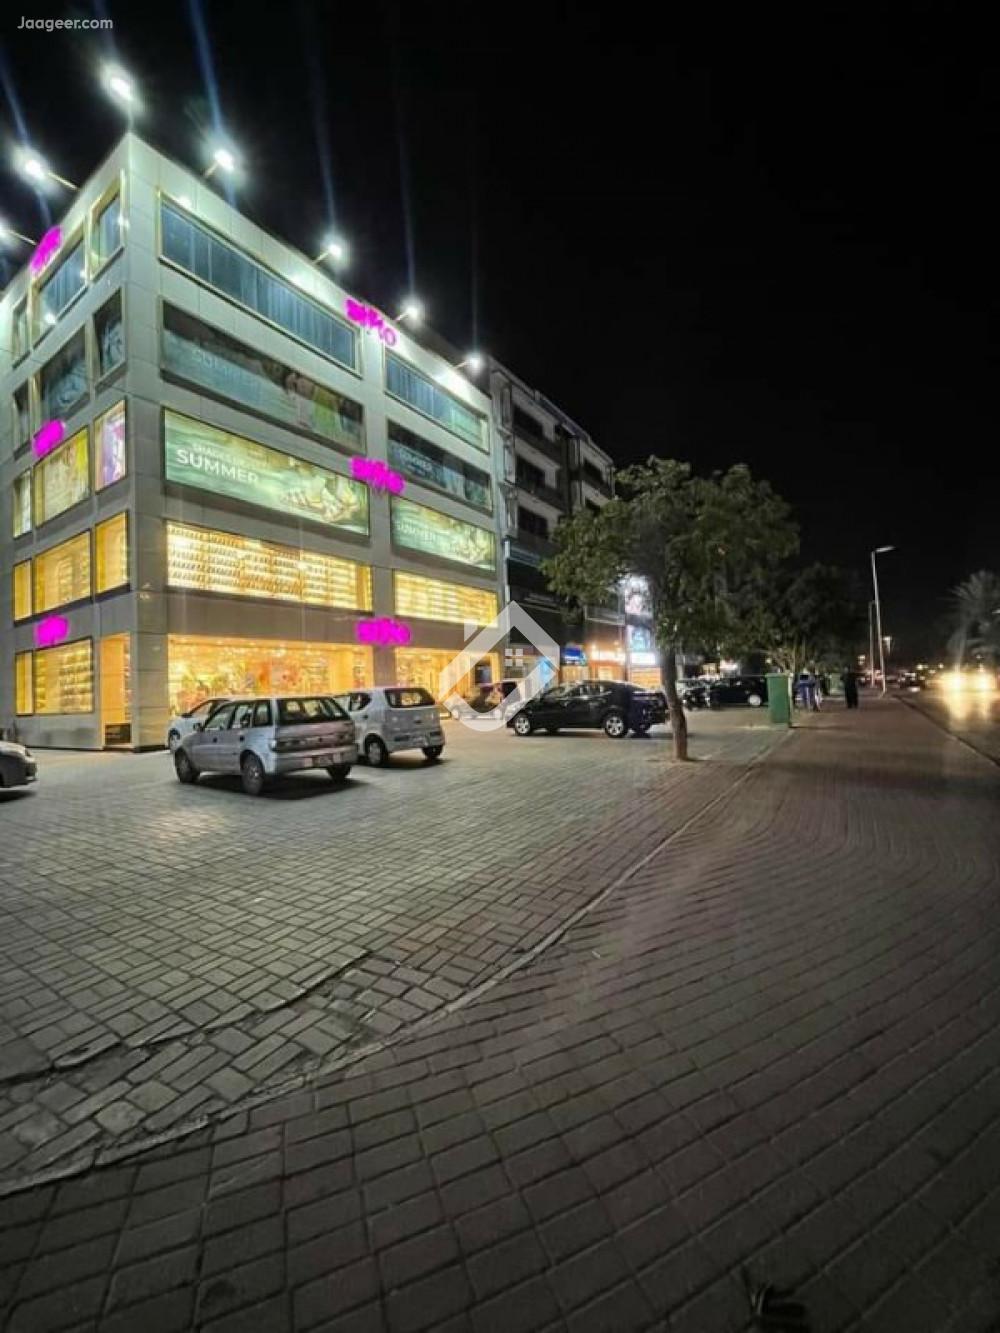 Main image 10 Marla Commercial Corner Building For Sale In Bahria Town Plaza